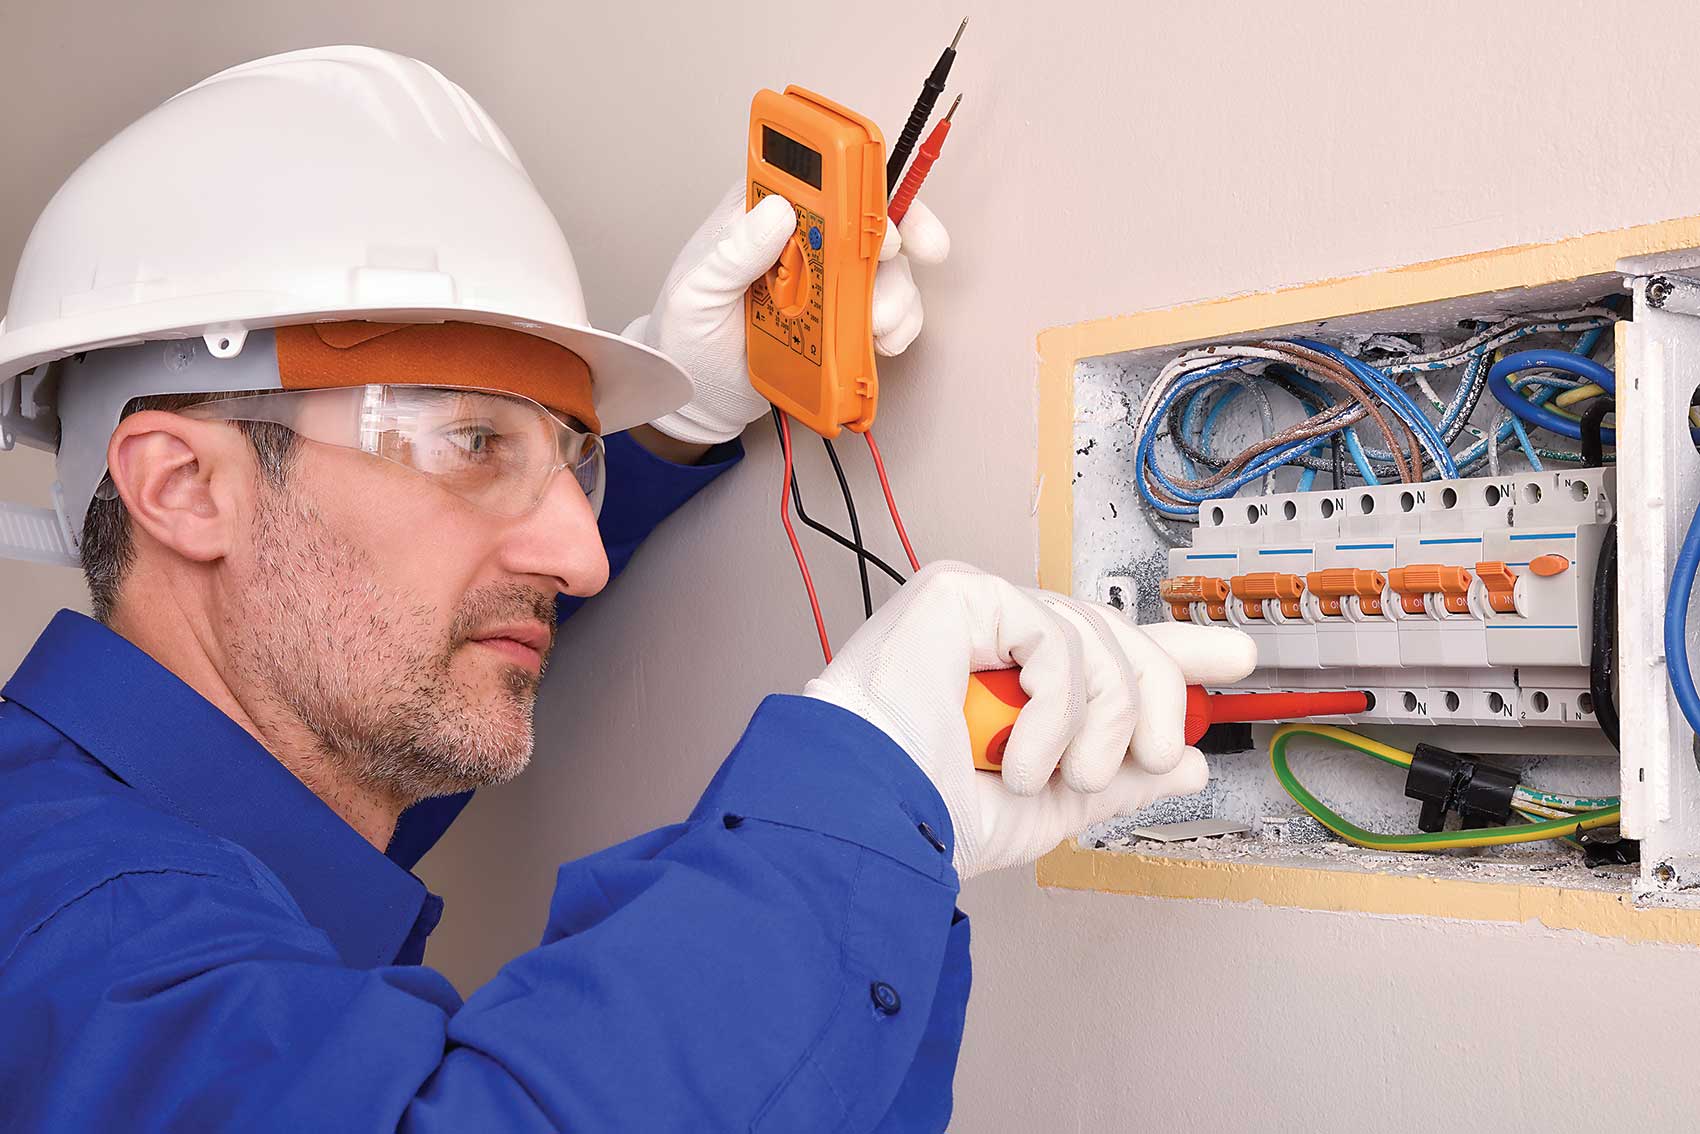 Electrician using proper ppe per NFPA 70E, ensuring safe work practices